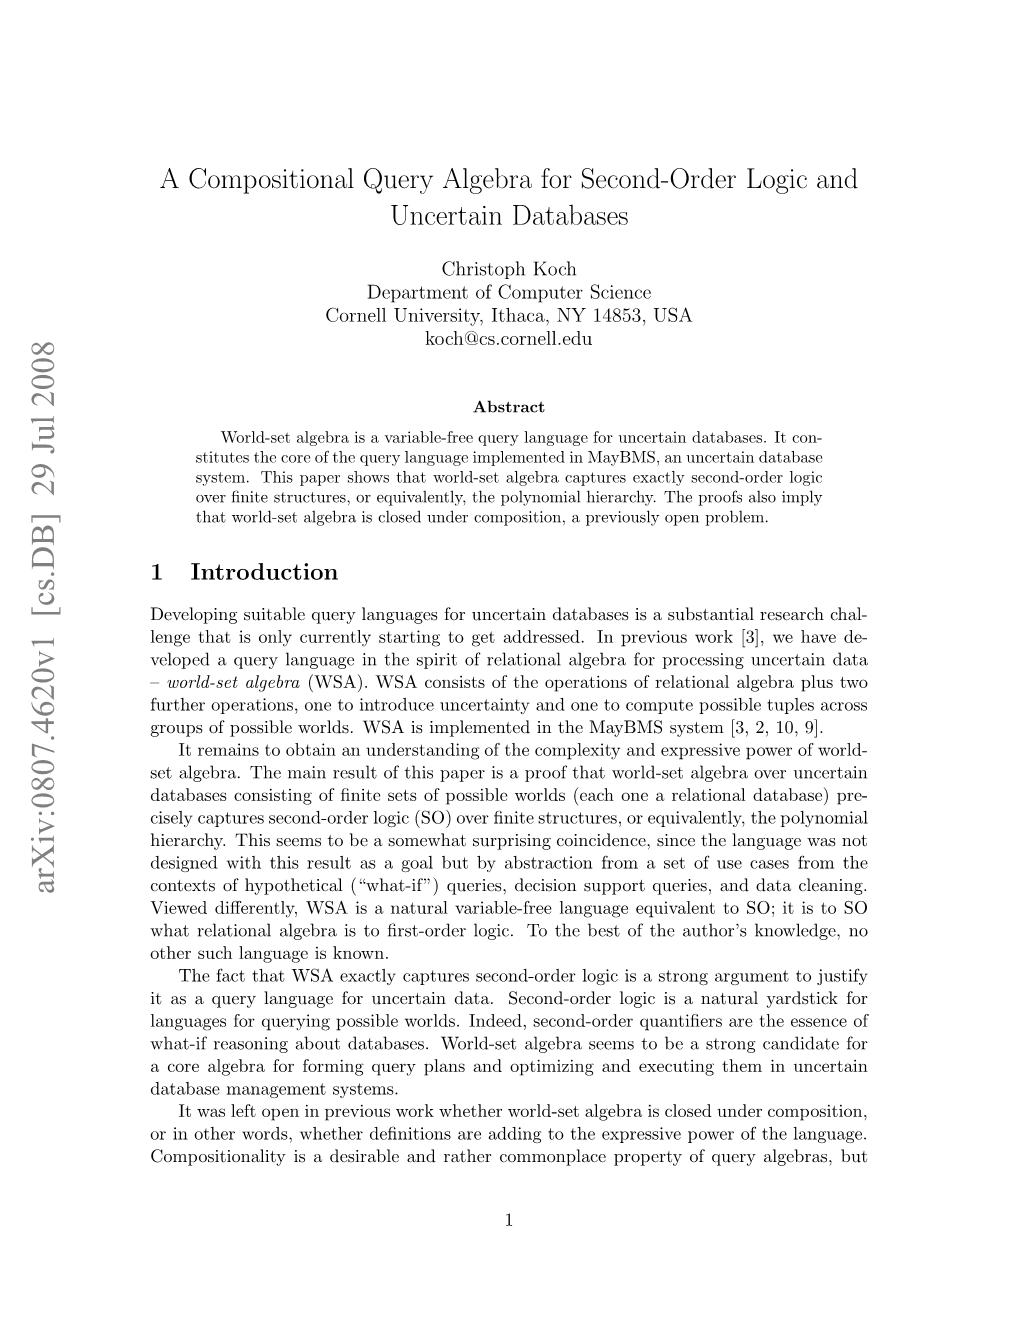 A Compositional Query Algebra for Second-Order Logic and Uncertain